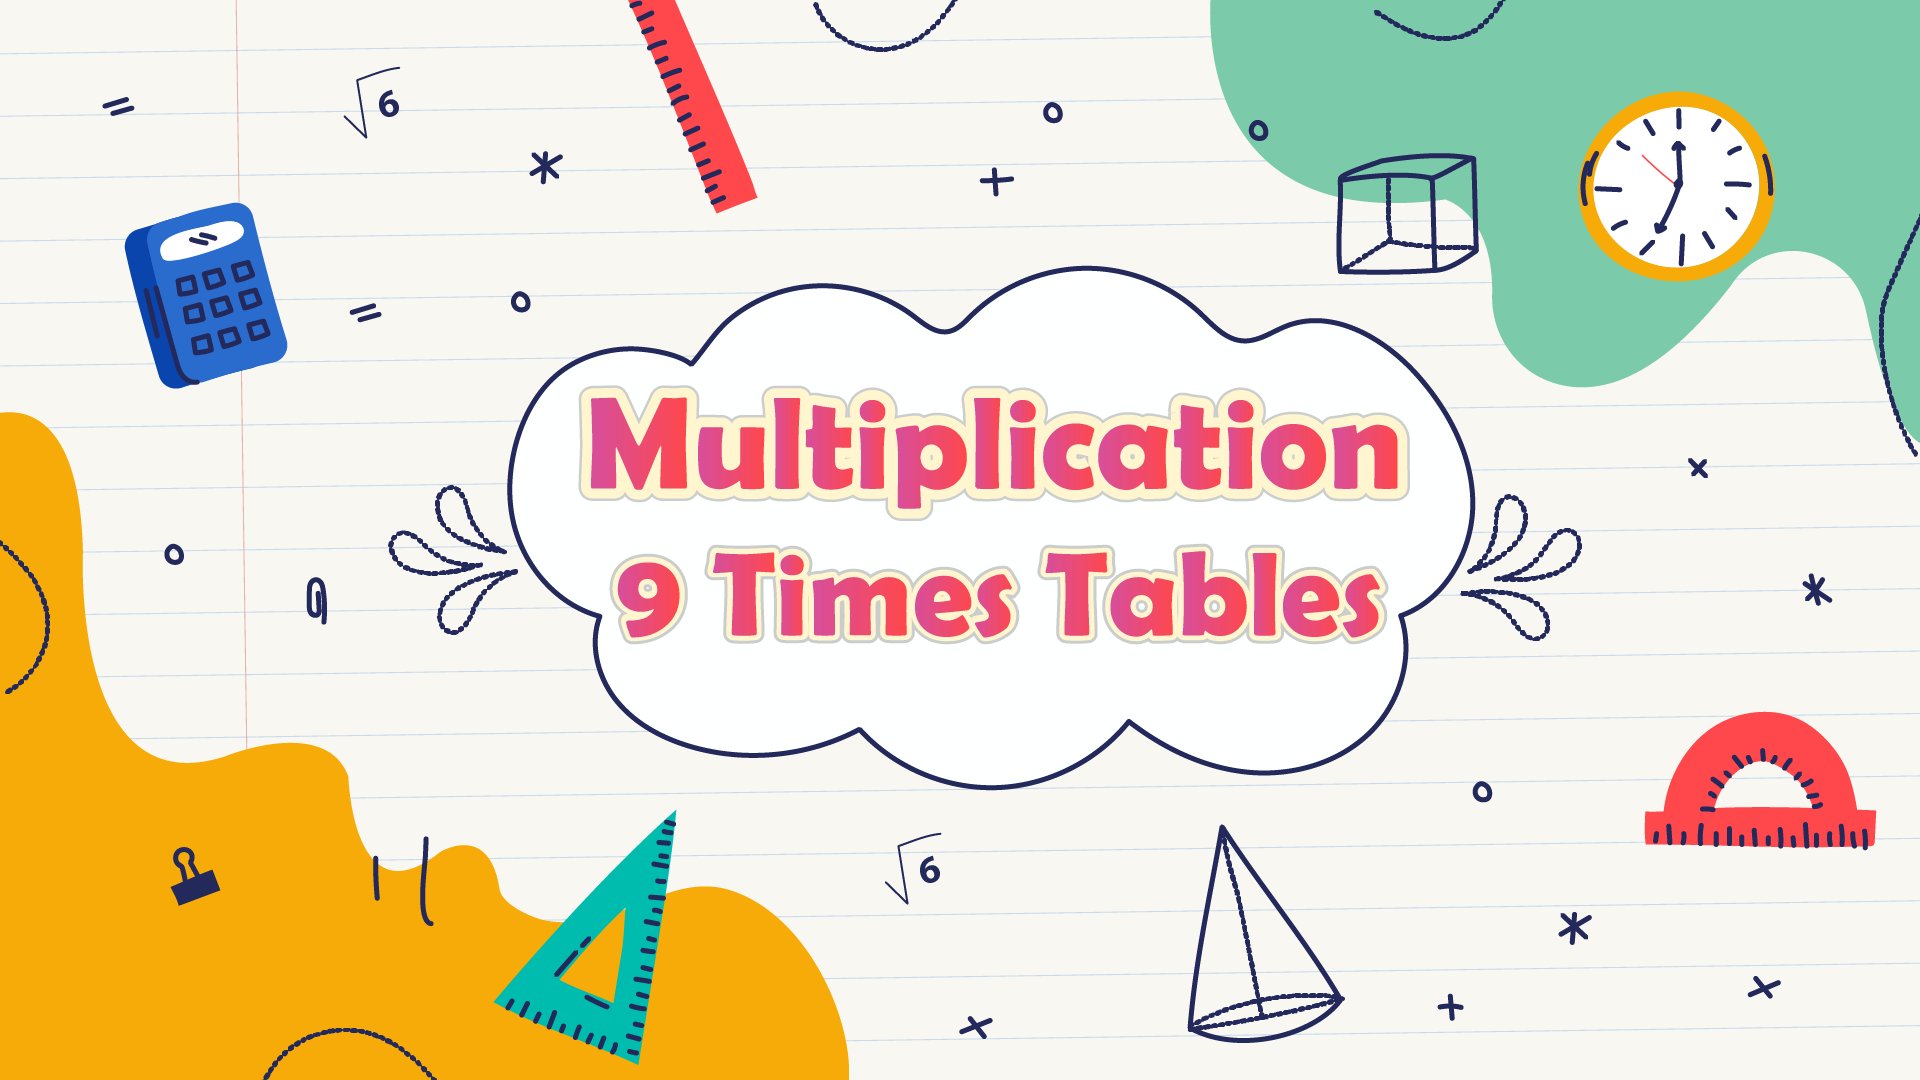 Multiplication 9 Times Tables